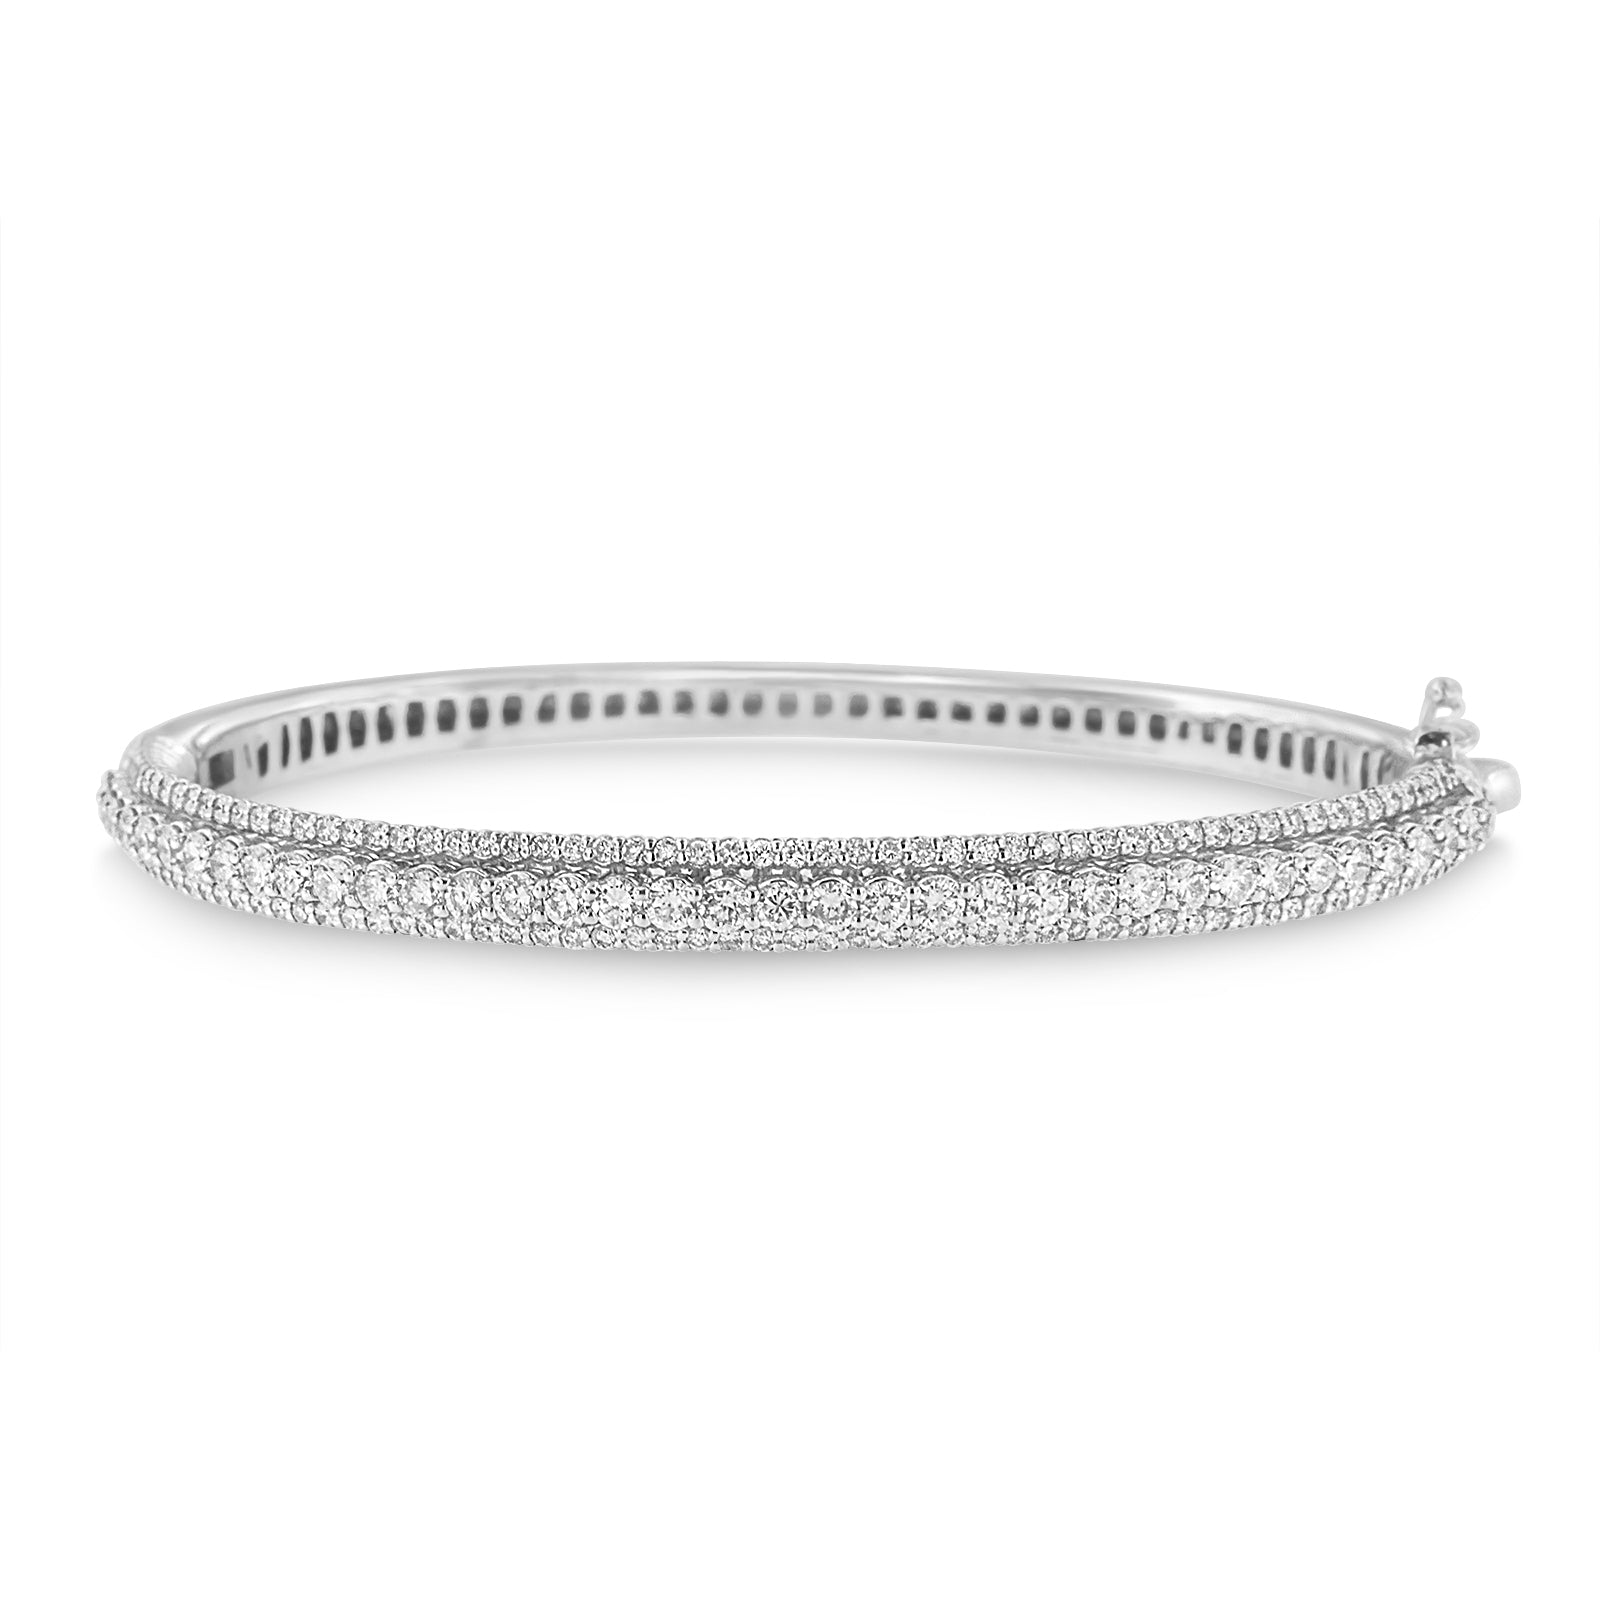 14K White Gold Round-Cut Diamond Bangle (3 cttw, H-I Color, SI1-SI2 Clarity) - LinkagejewelrydesignLinkagejewelrydesign